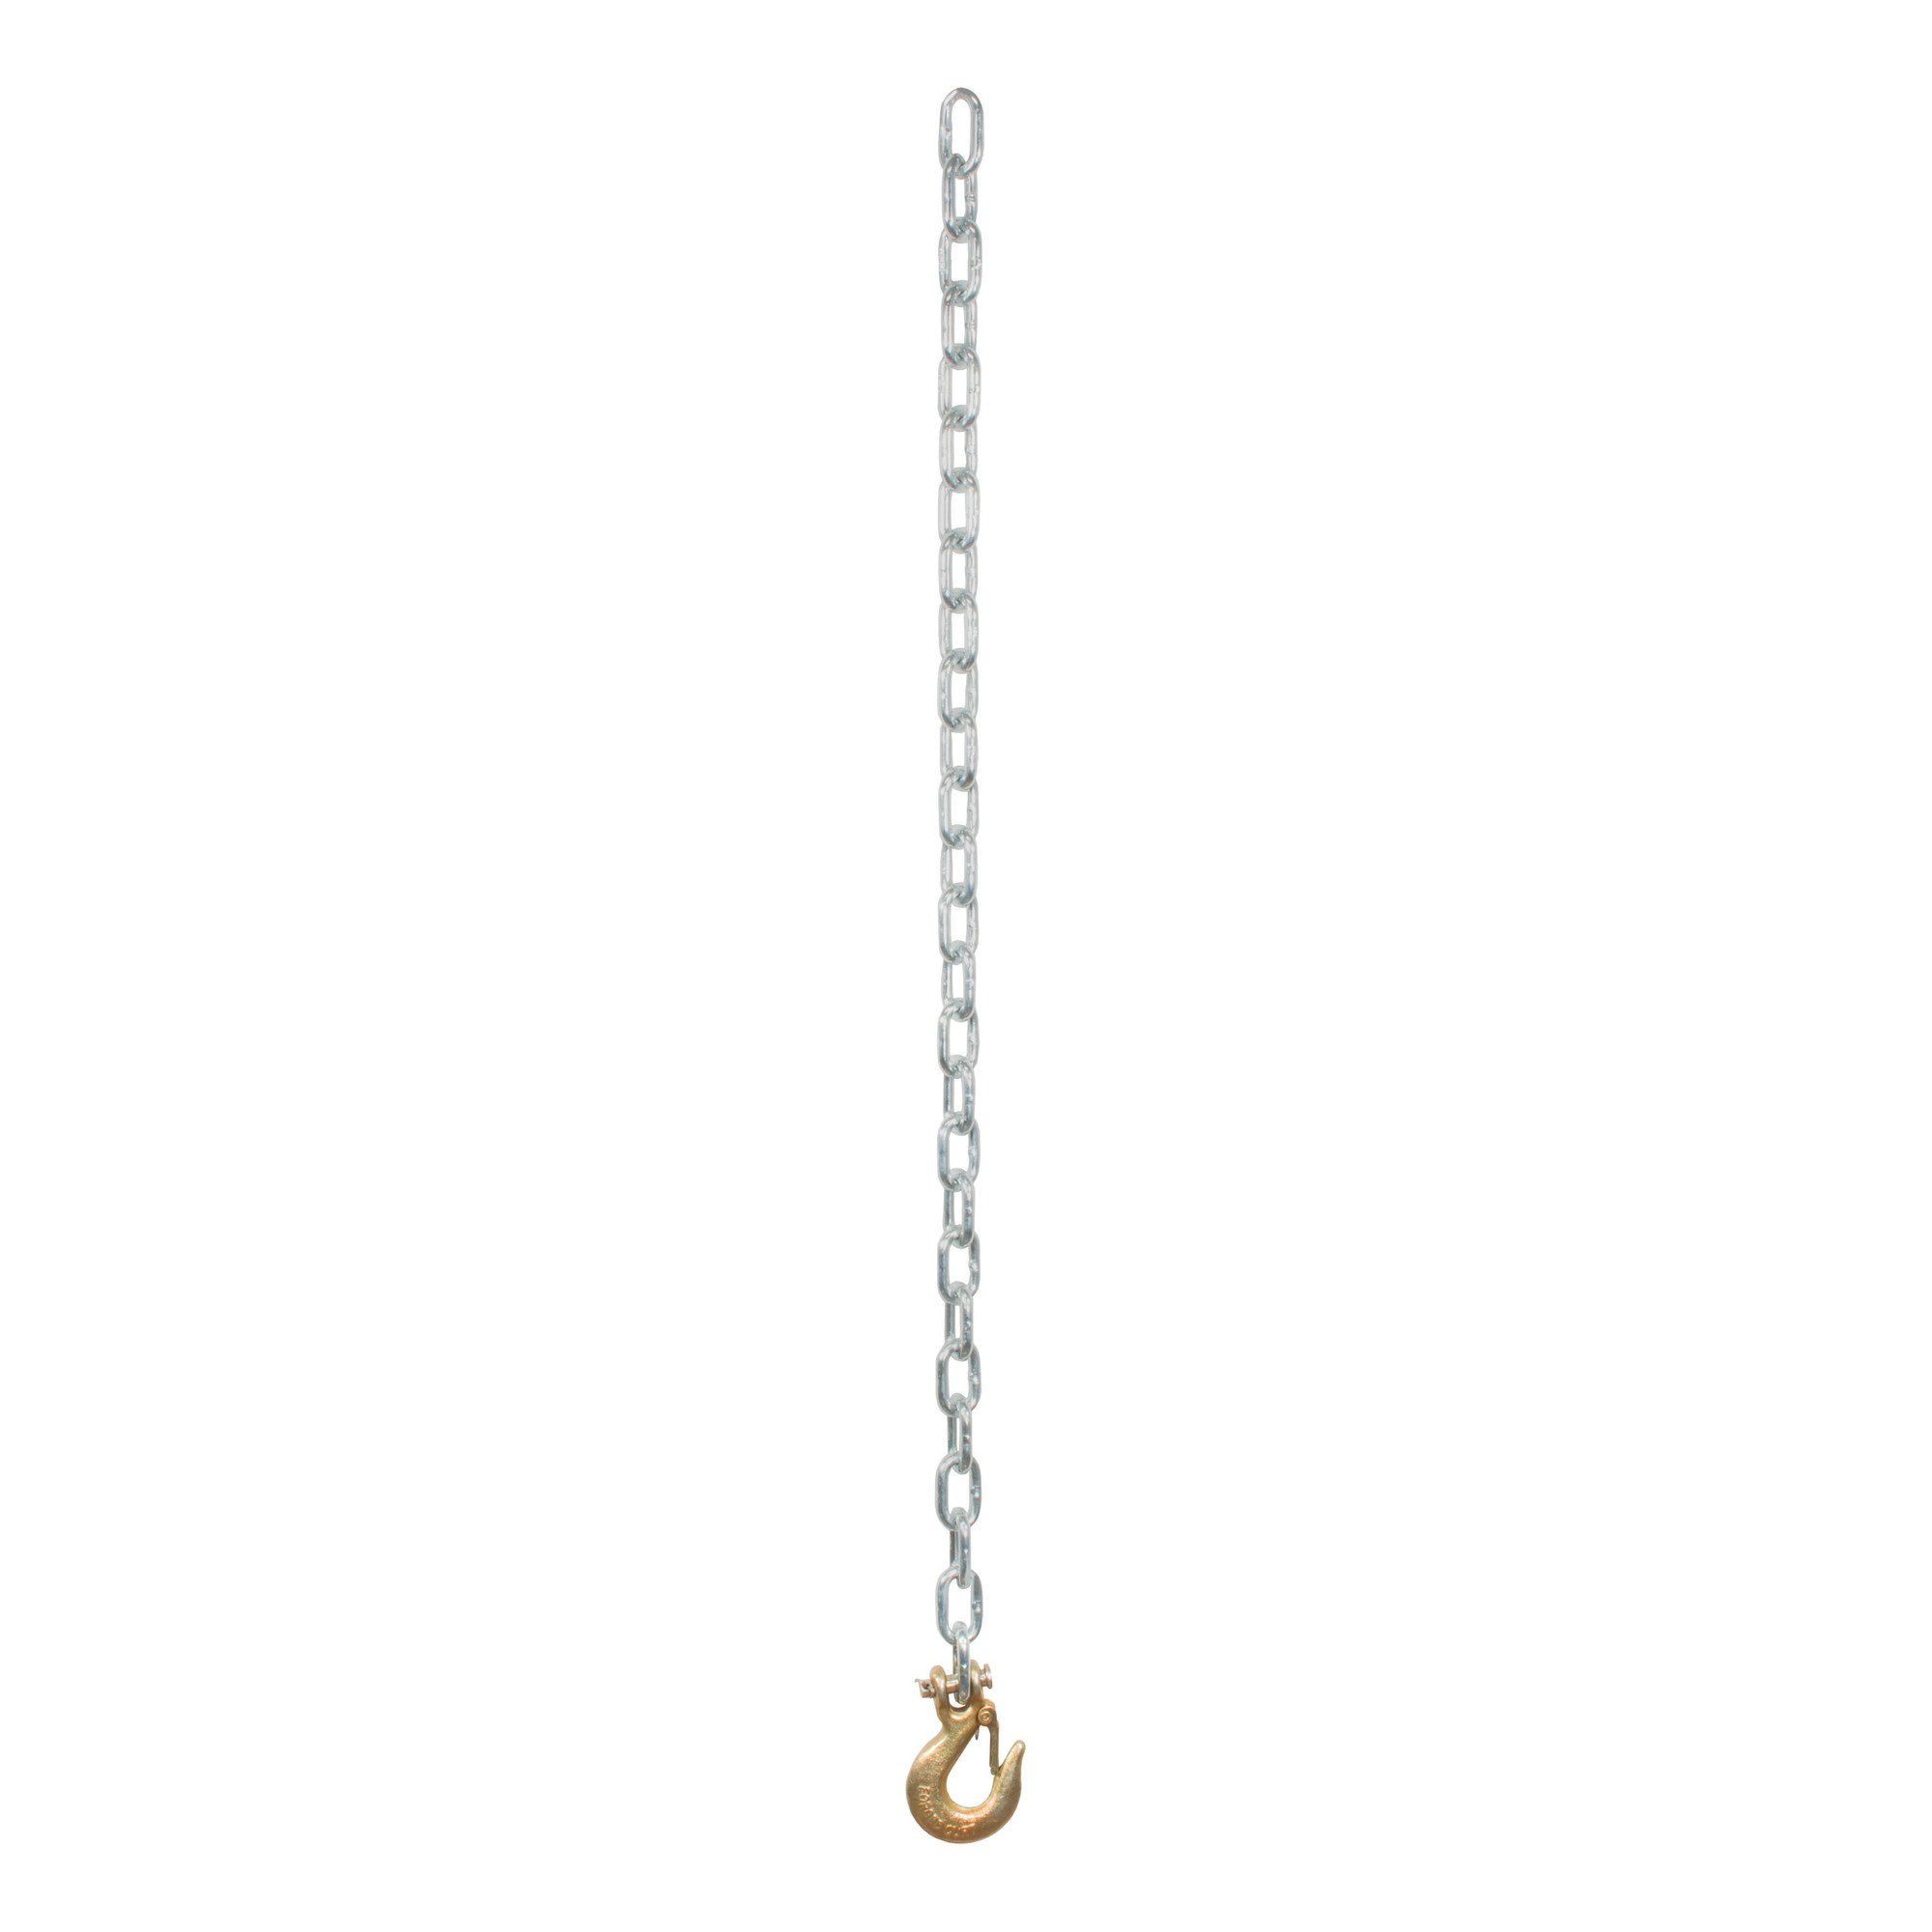 Curt Manufacturing, 35Inch Safety Chain with 1 Clevis Hook, Length 35 in, Material Steel, Model 80302